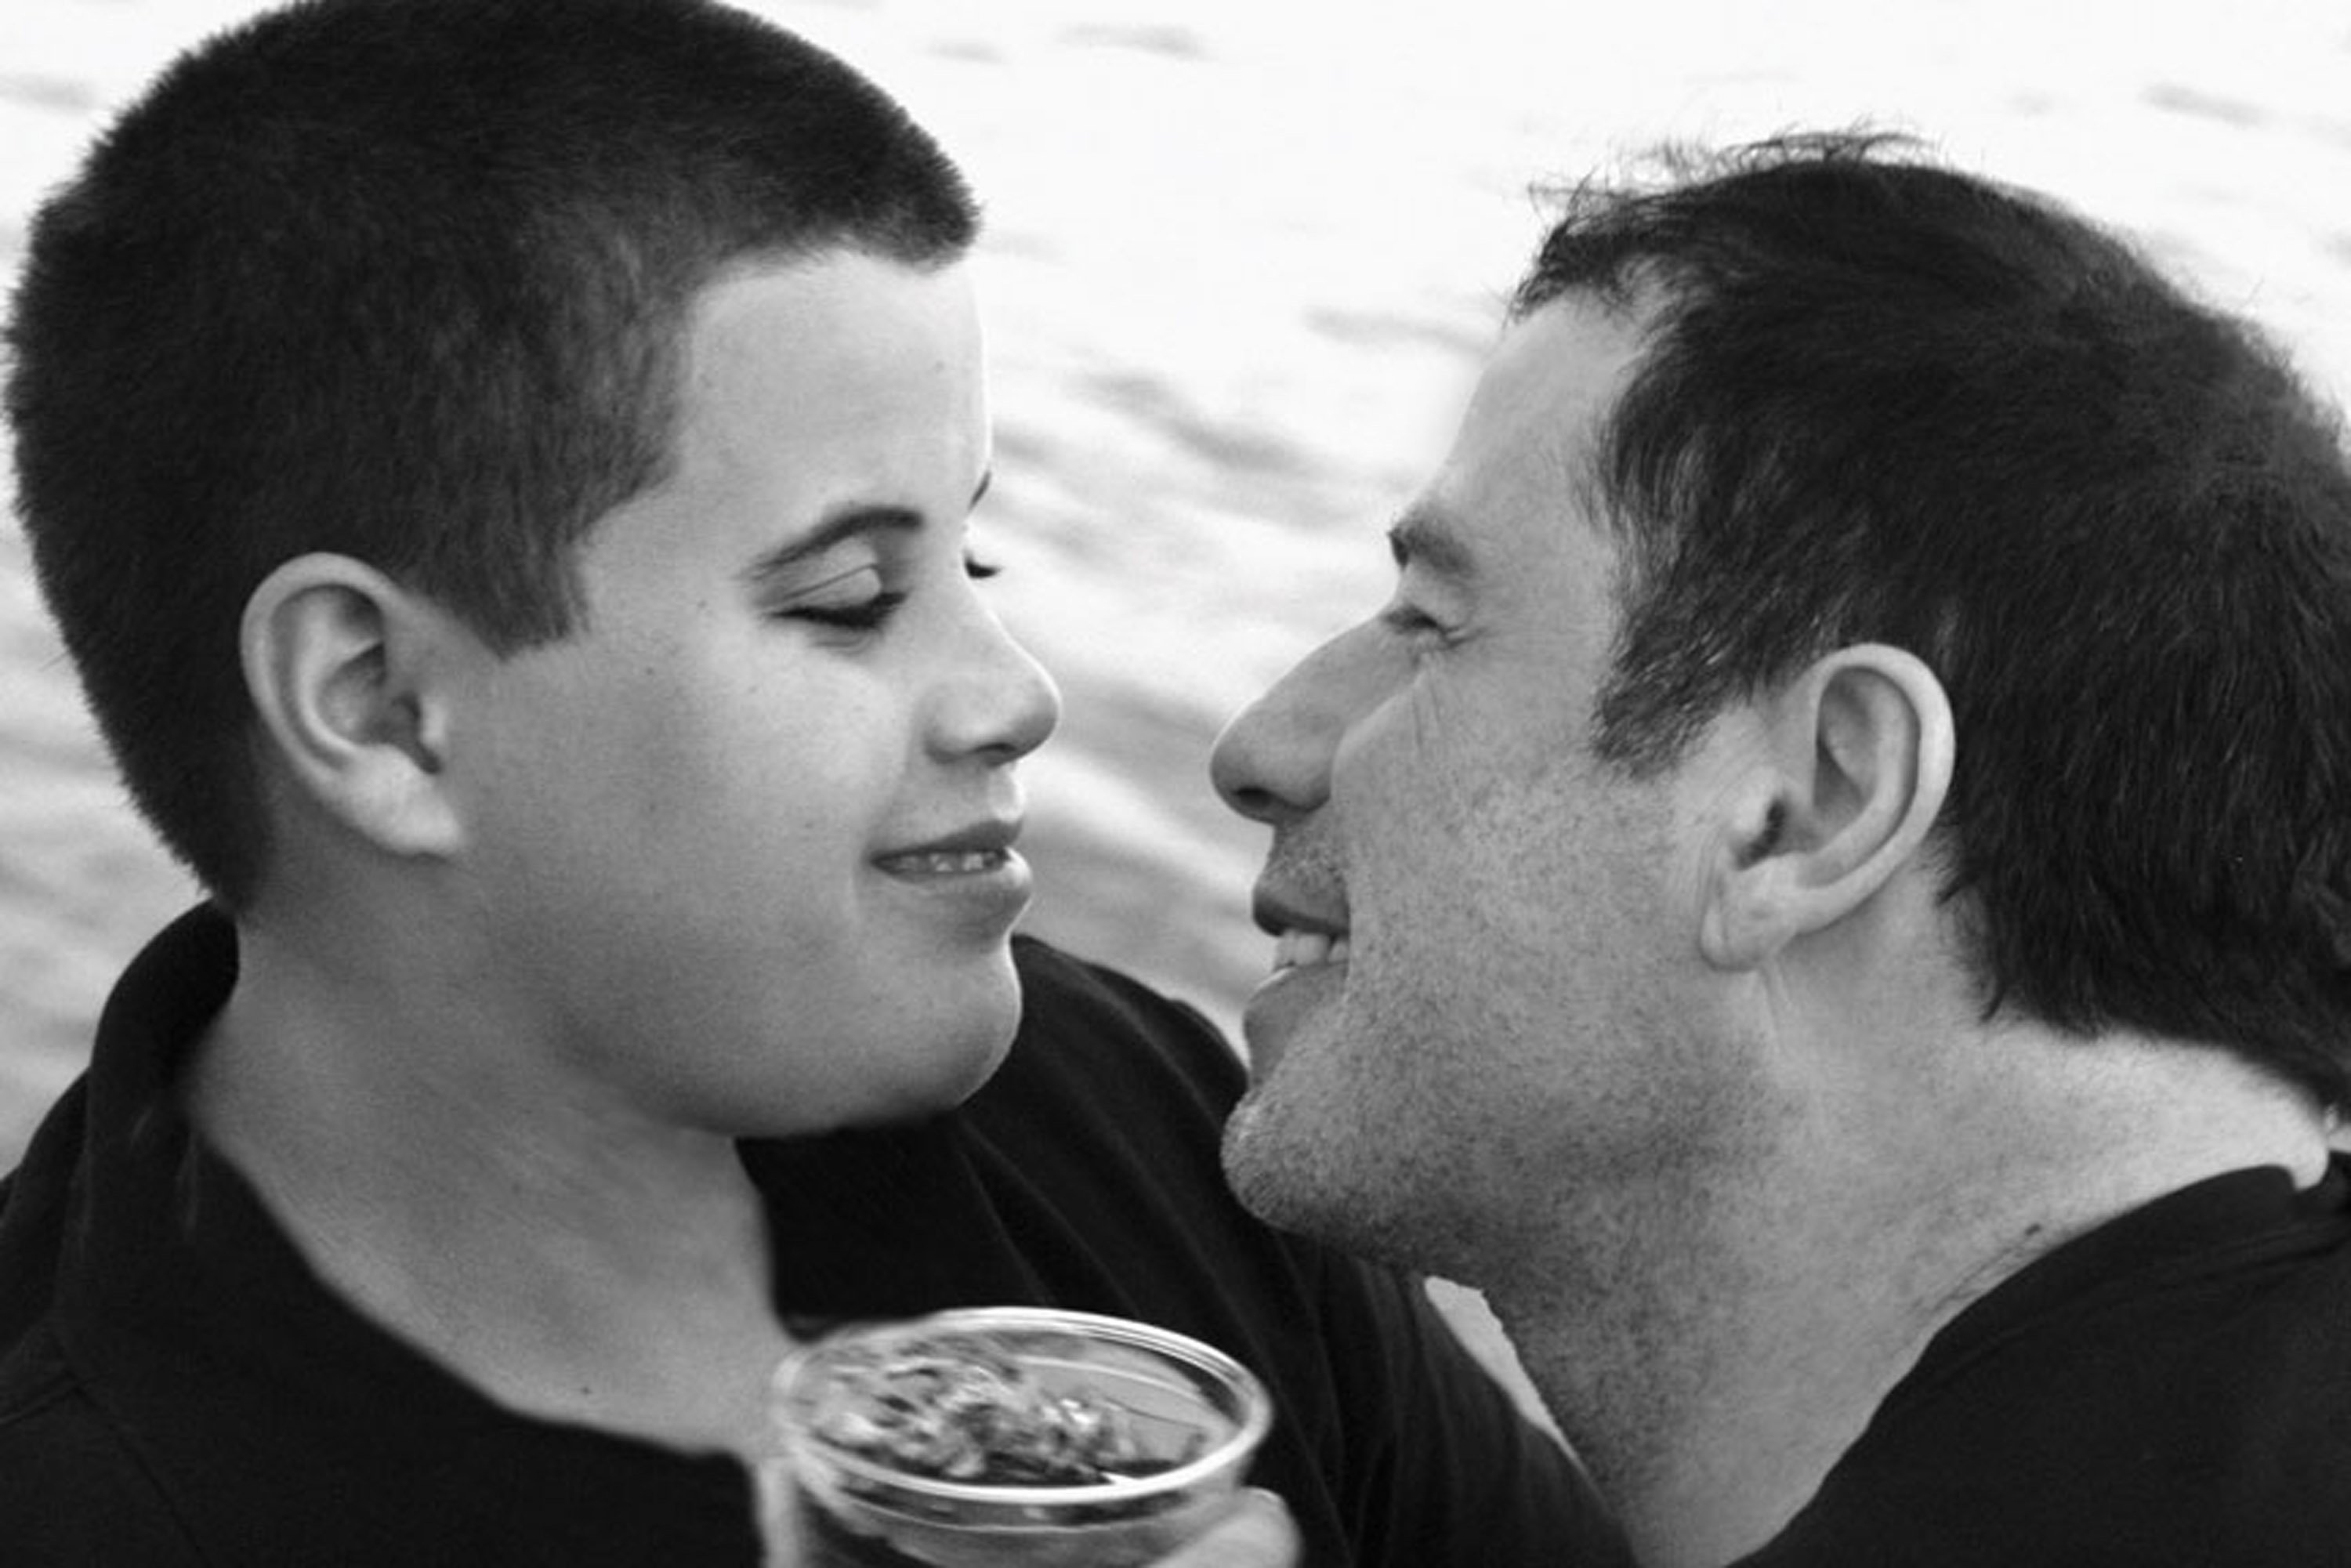 In this handout from Rogers and Cowan, Jett Travolta is seen with his father, actor John Travolta in this picture. | Source: Getty Images